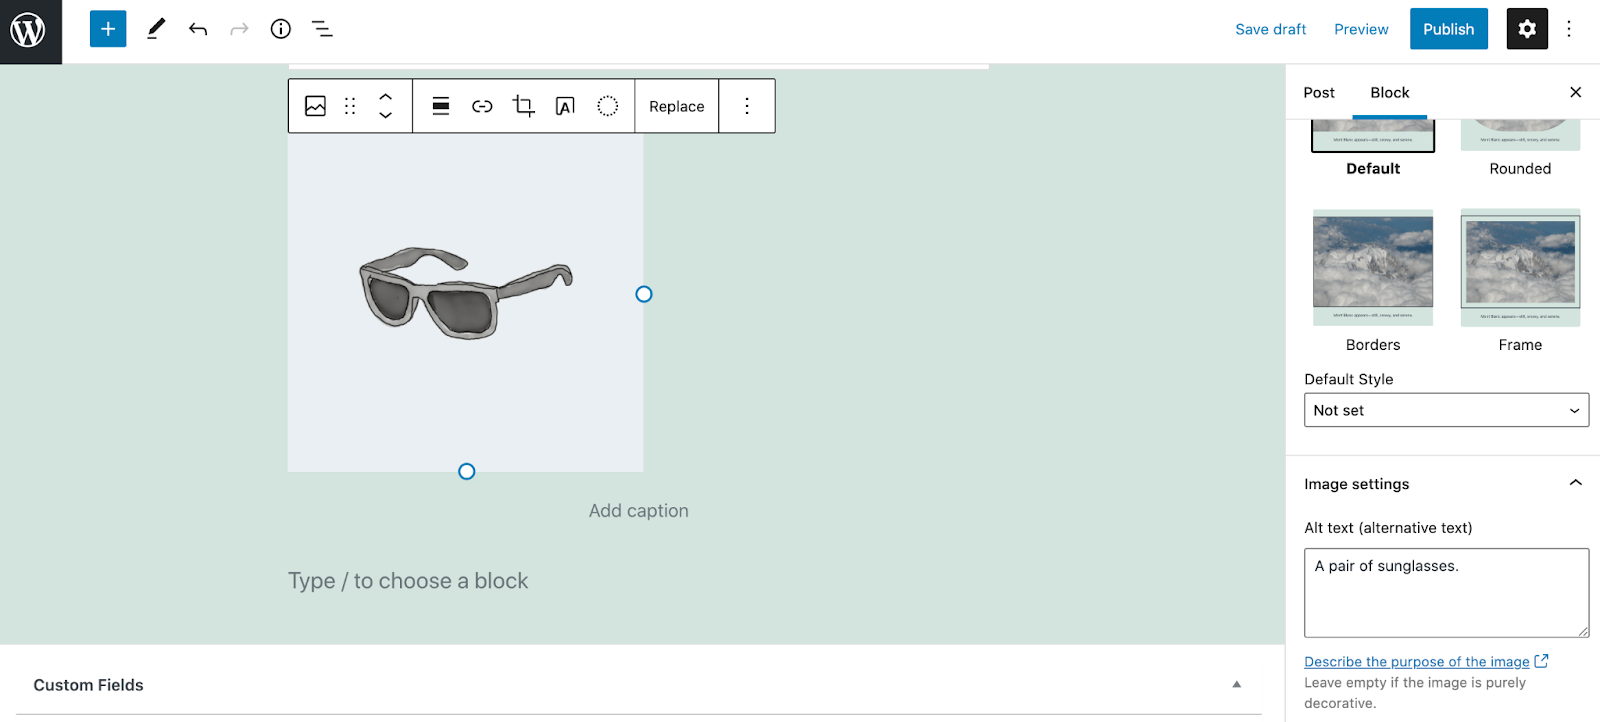 Screenshot of image being uploaded to WordPress with ALT text, "a pair of sunglasses" 